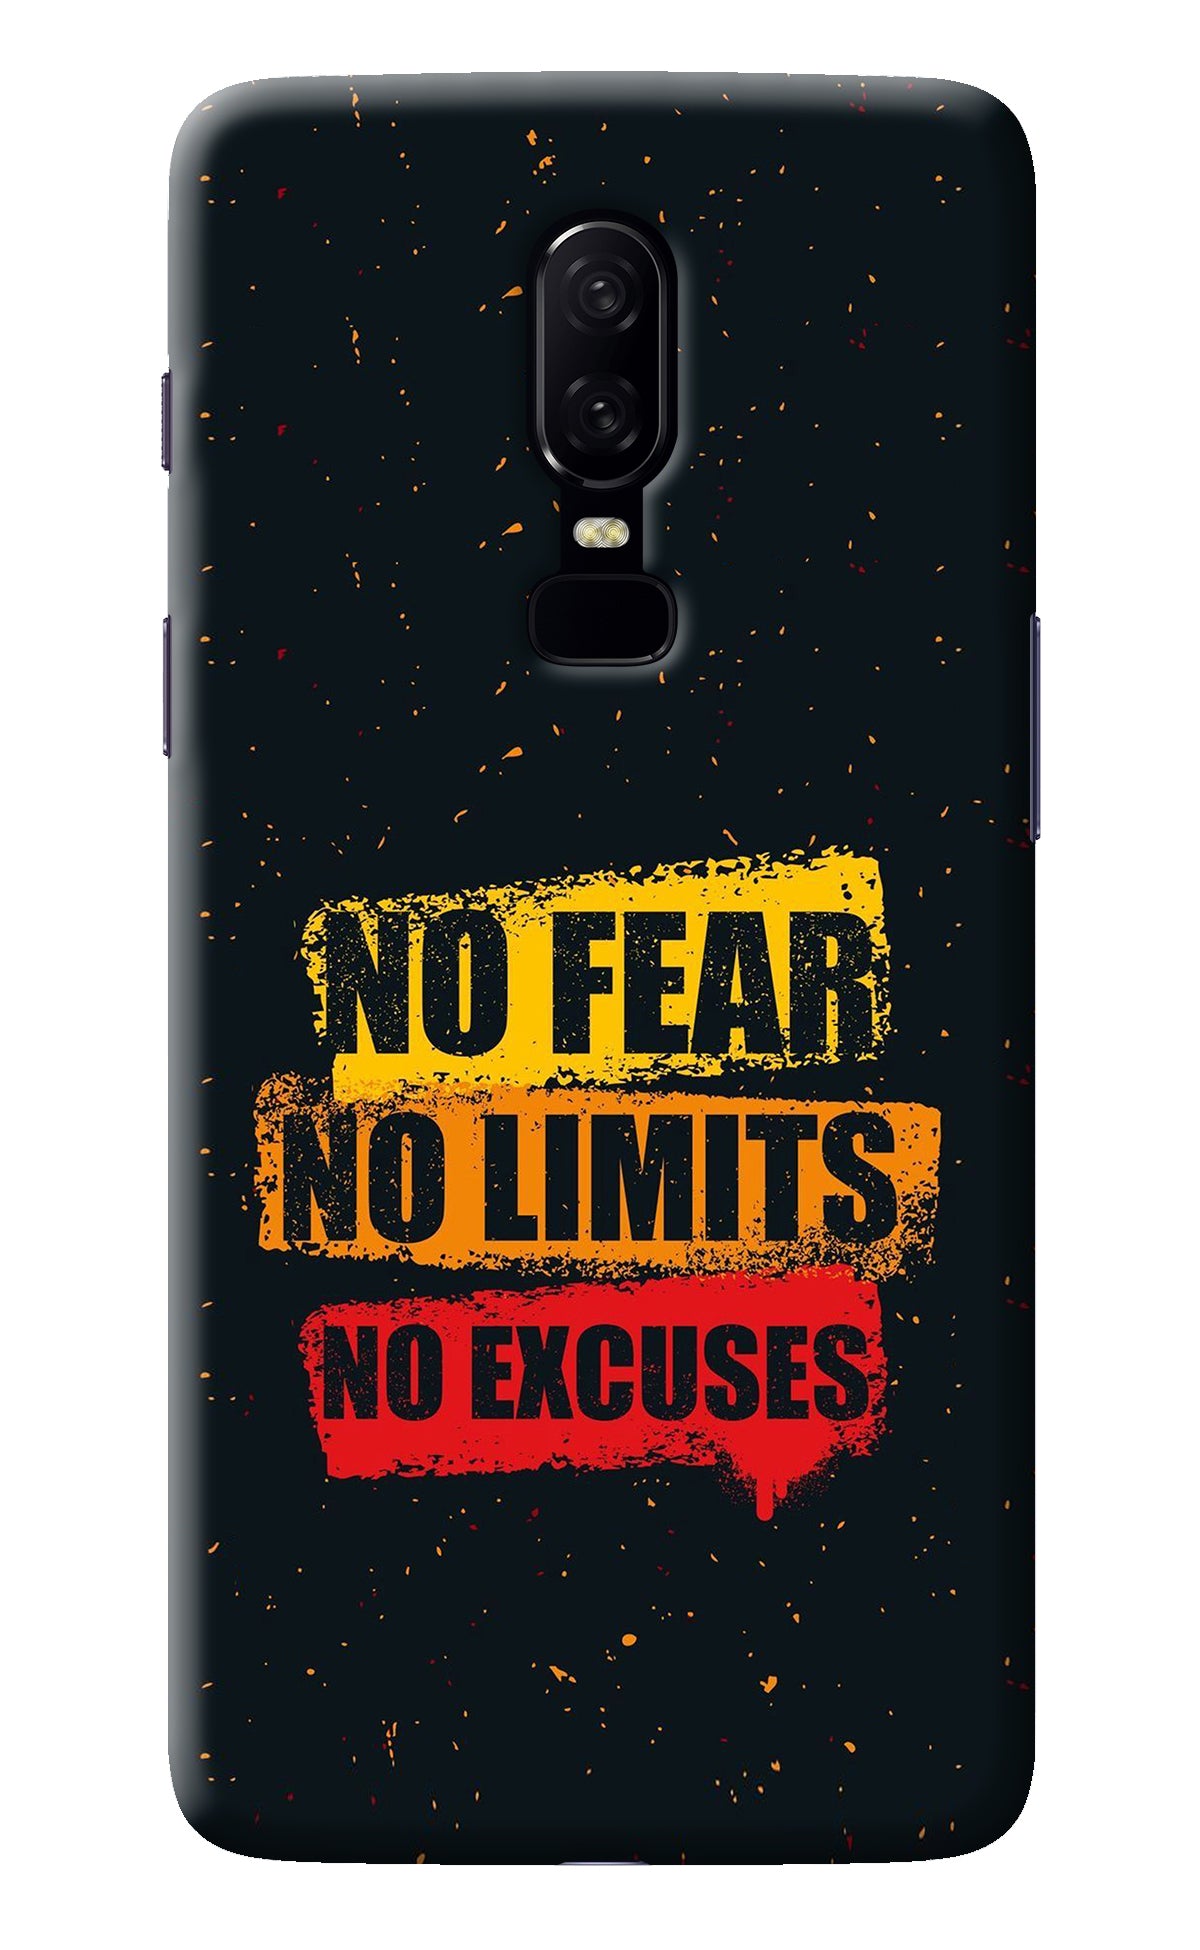 No Fear No Limits No Excuse Oneplus 6 Back Cover